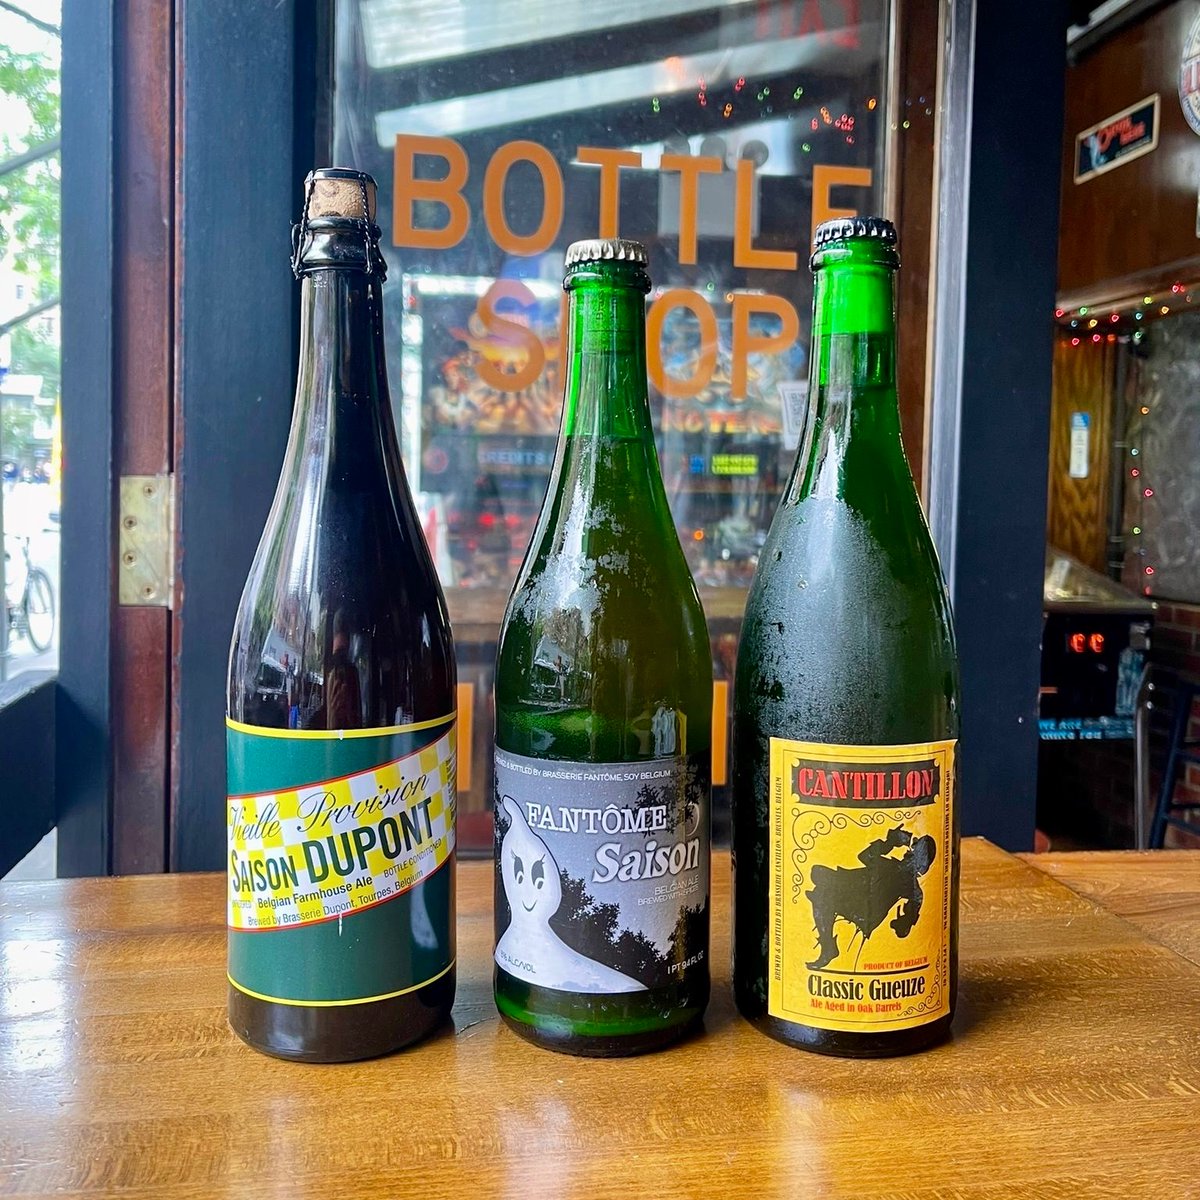 Another beautiful day!  Do it in style with one of our LARGE FORMAT BOTTLES!
Saison Dupont Farmhouse Ale - Brasserie Dupont
Fantôme (Saison) Farmhouse Ale - Brasserie Fantôme
Classic Gueuze - Brasserie Cantillon
WE OPEN AT 3pm!
#gebhardsbeerculture